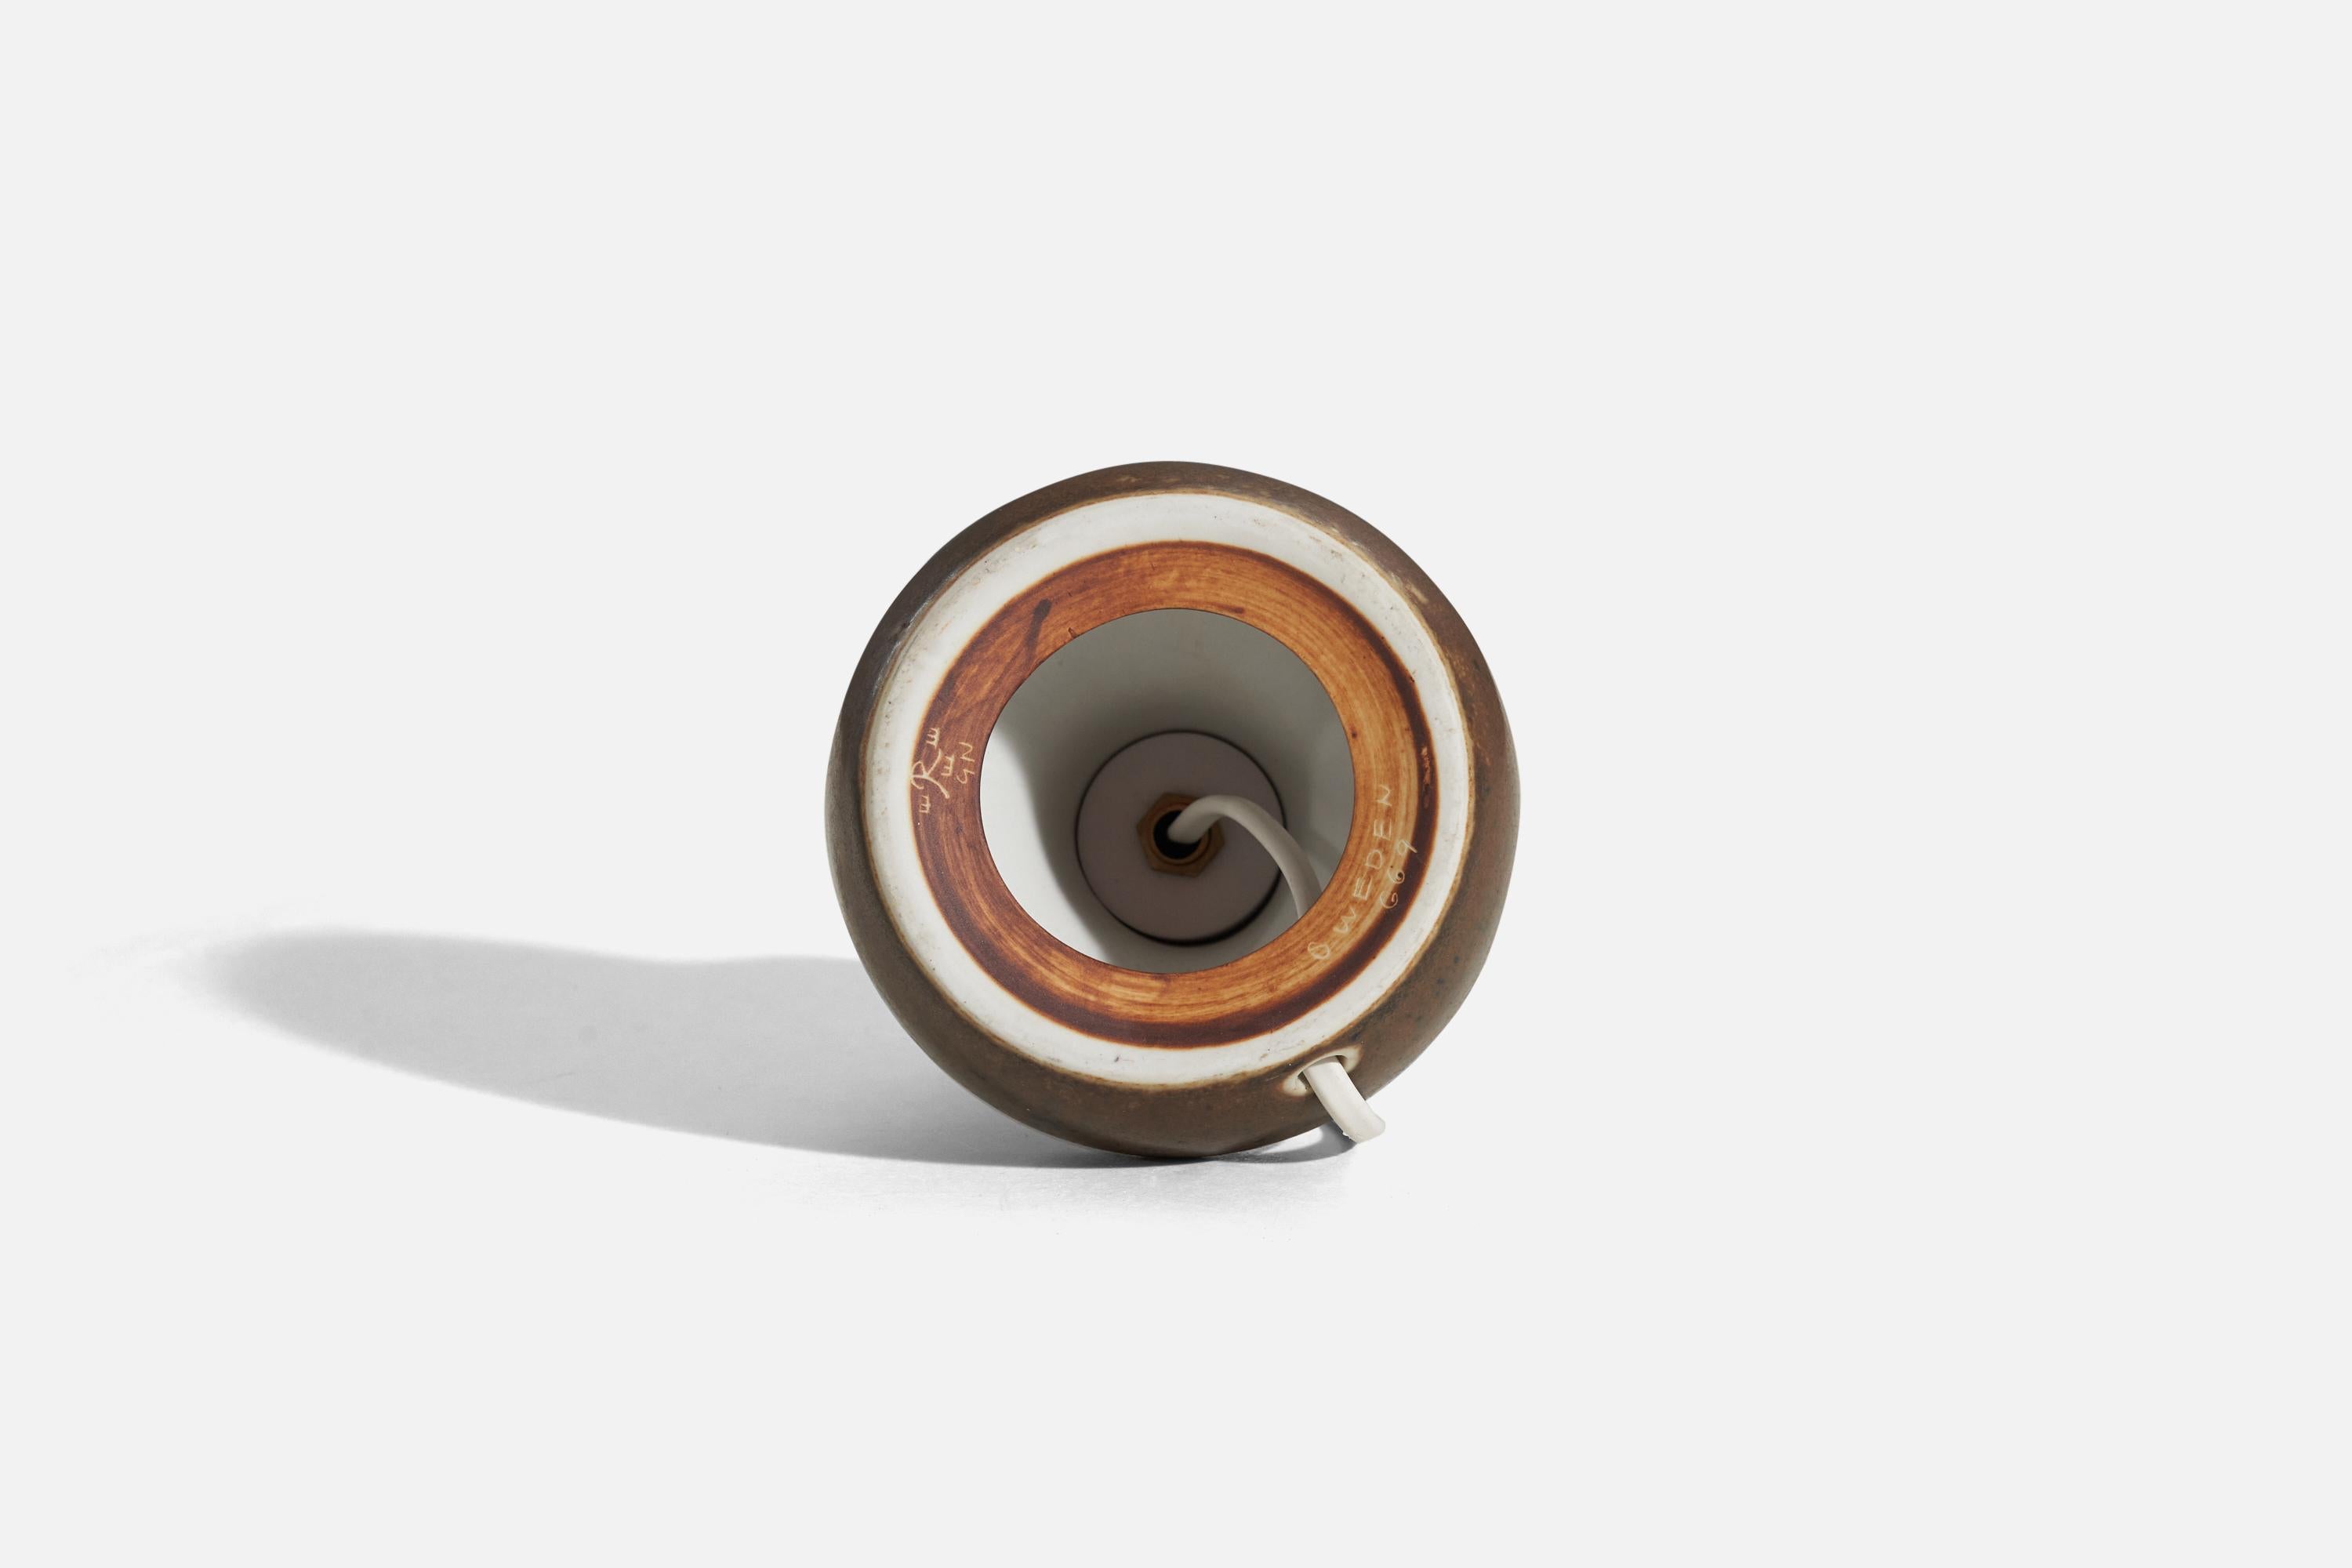 Mid-20th Century Gunnar Nylund, Table Lamp, Brown-Glazed Stoneware, Rörstand, Sweden, 1950s For Sale